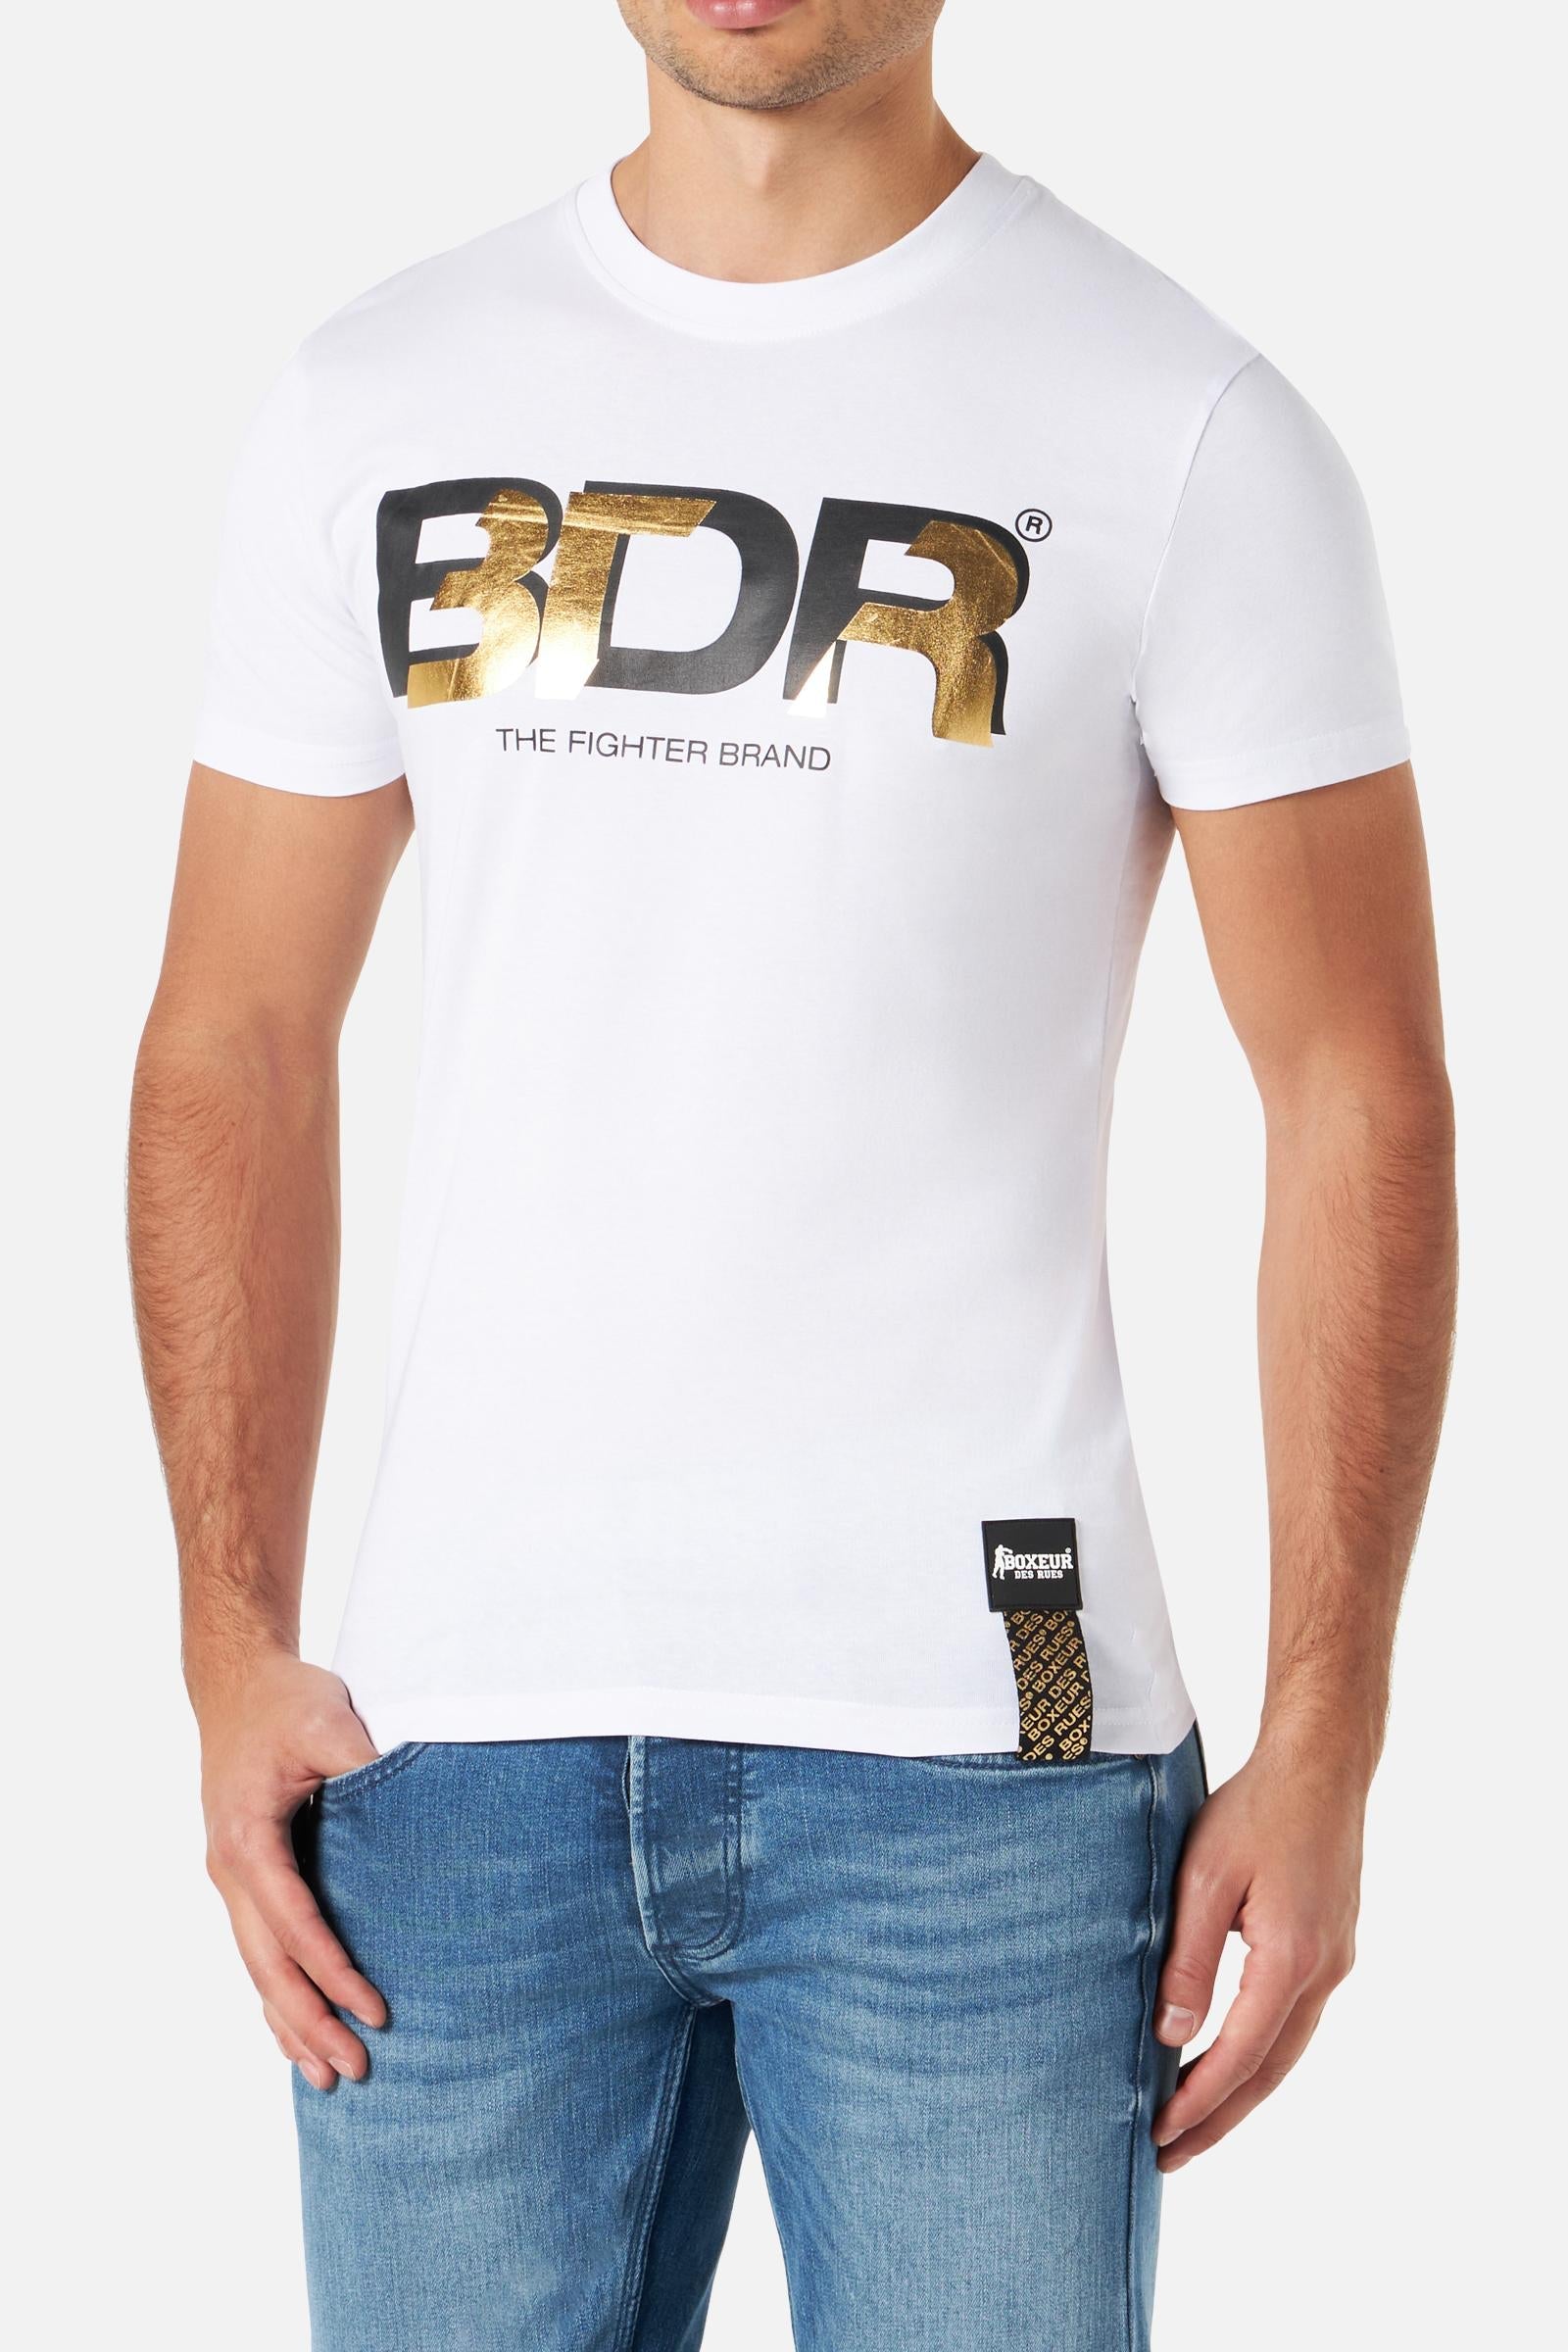 Bdr Printed T-Shirt in White T-Shirts Boxeur des Rues   